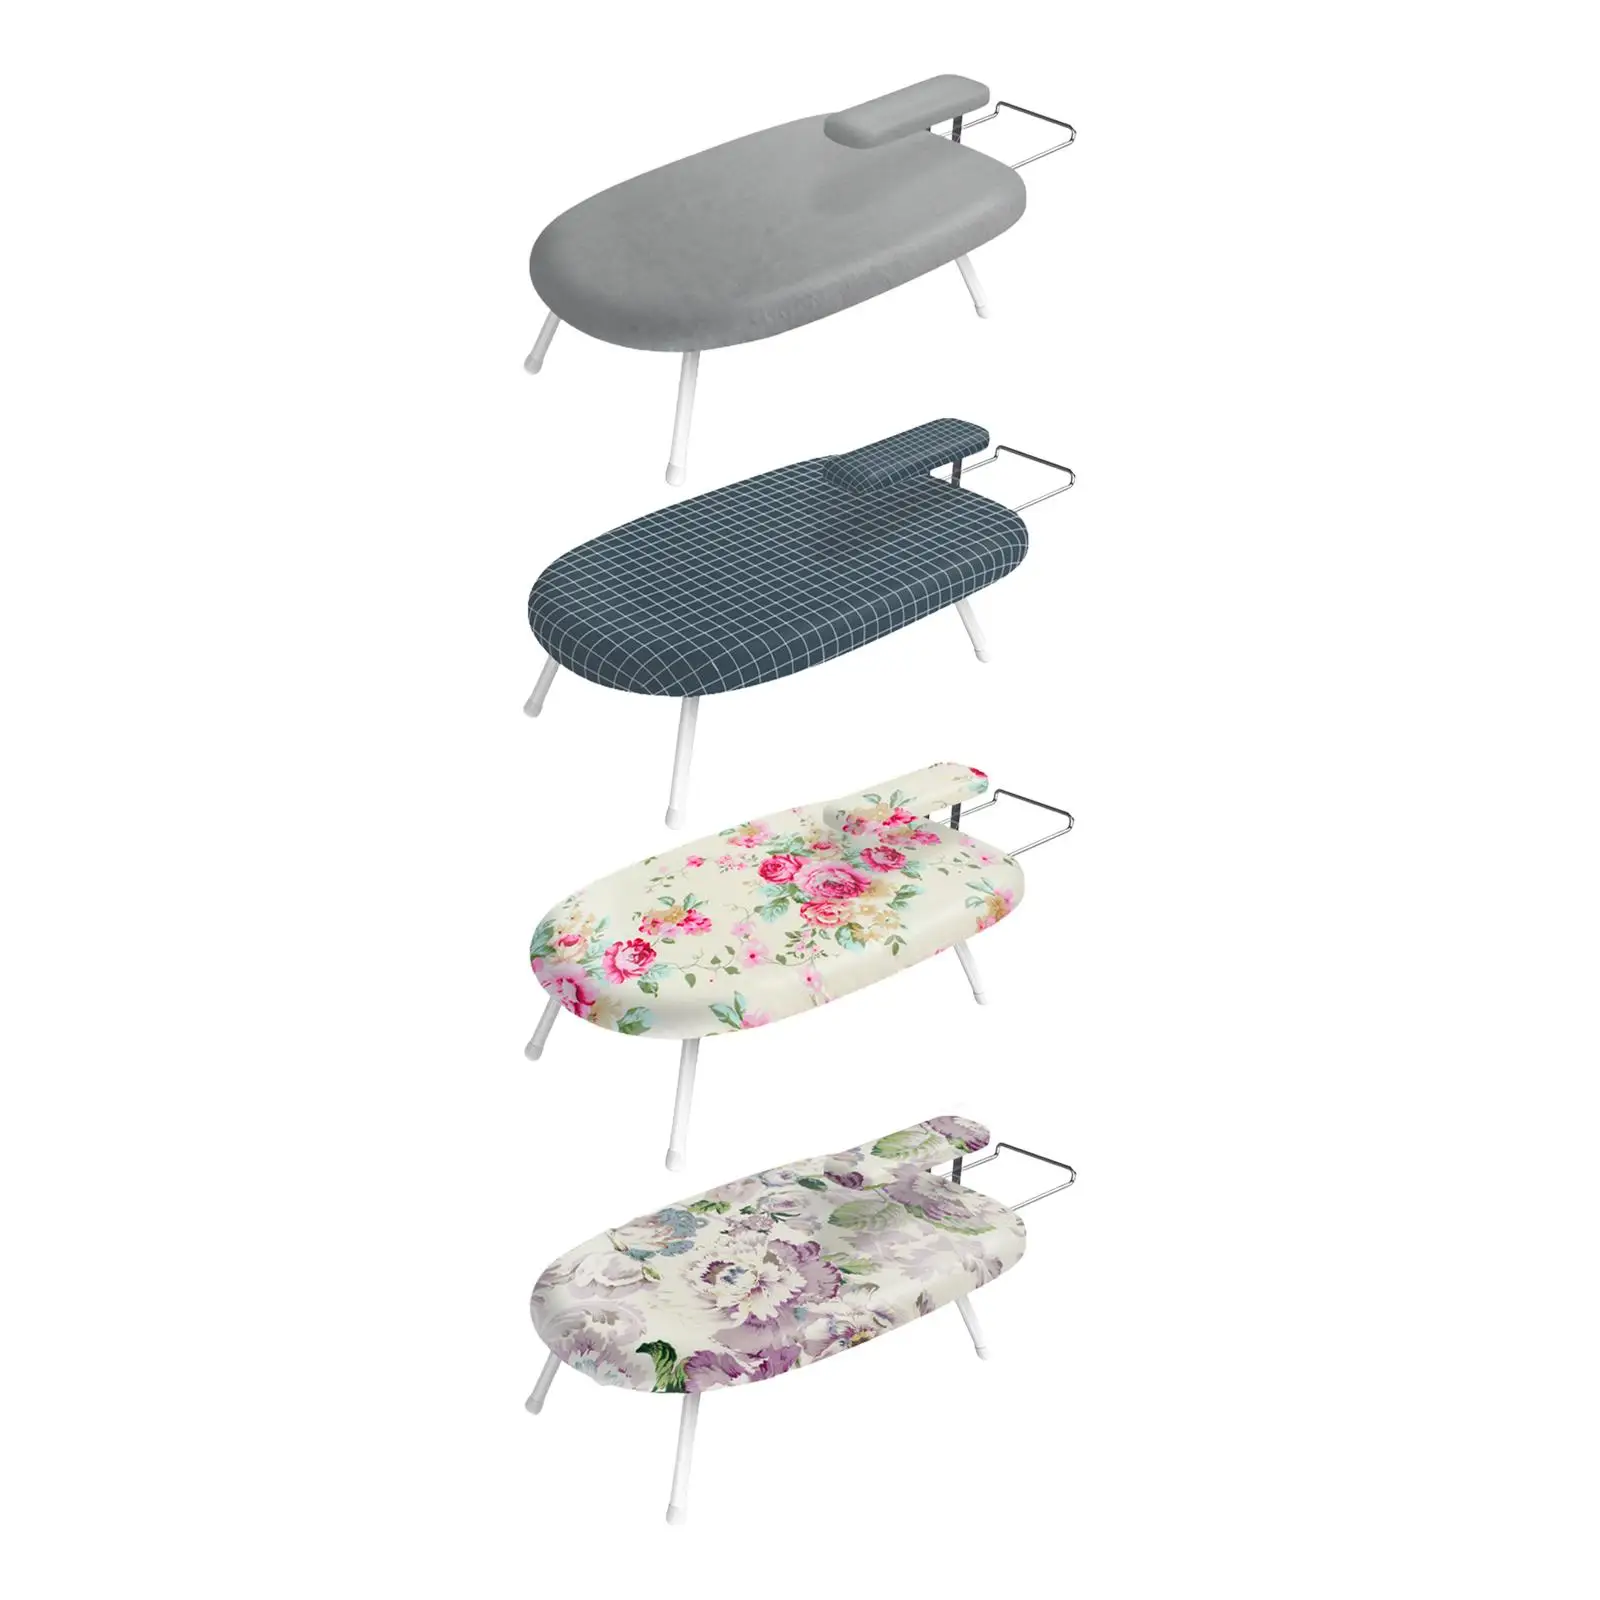 Tabletop Ironing Board Removable Sleeve Folding Portable for Home Ironing Clothes